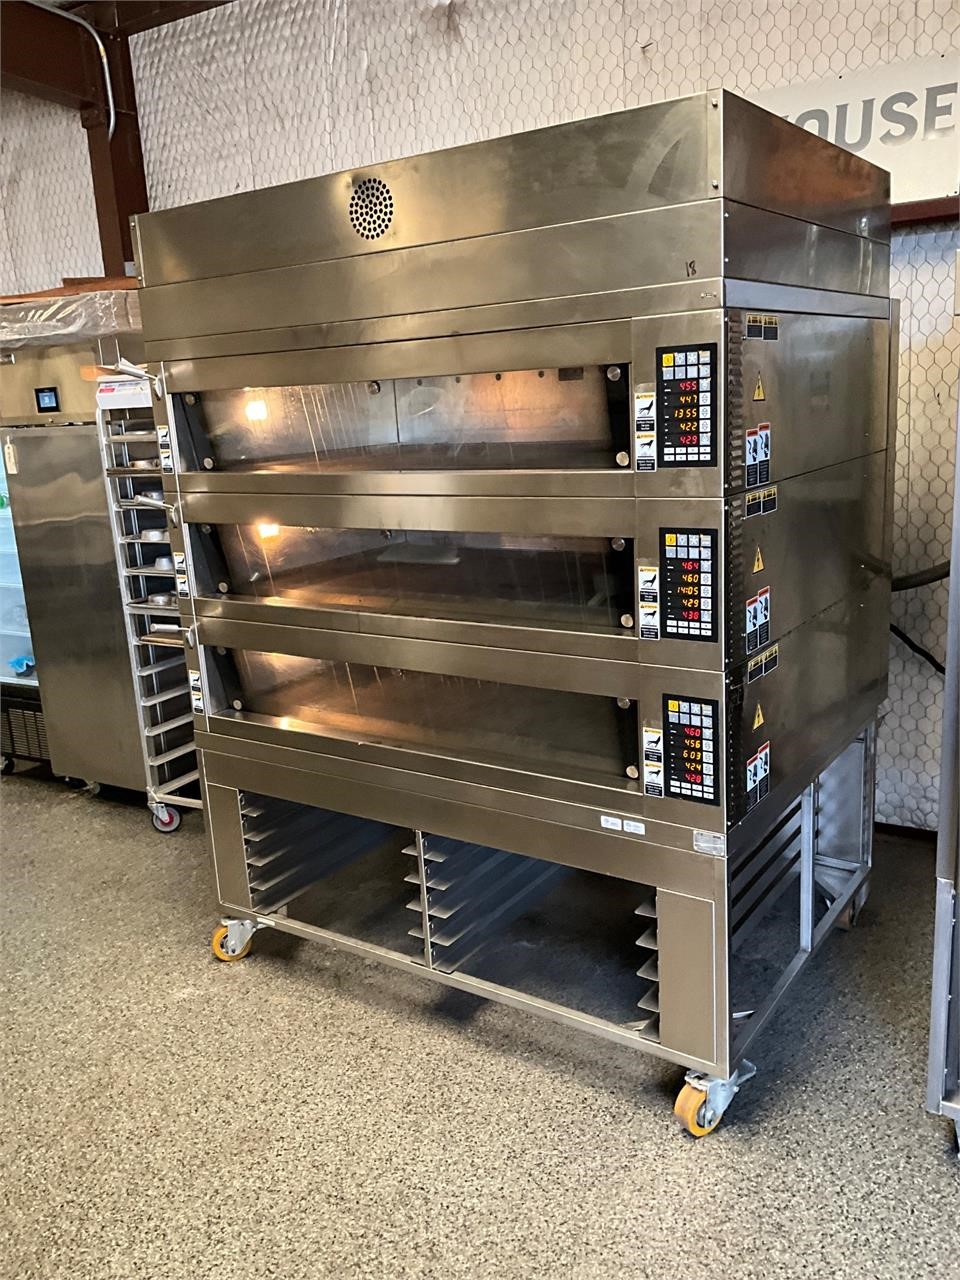 May 29th Restaurant and Bakery Auction